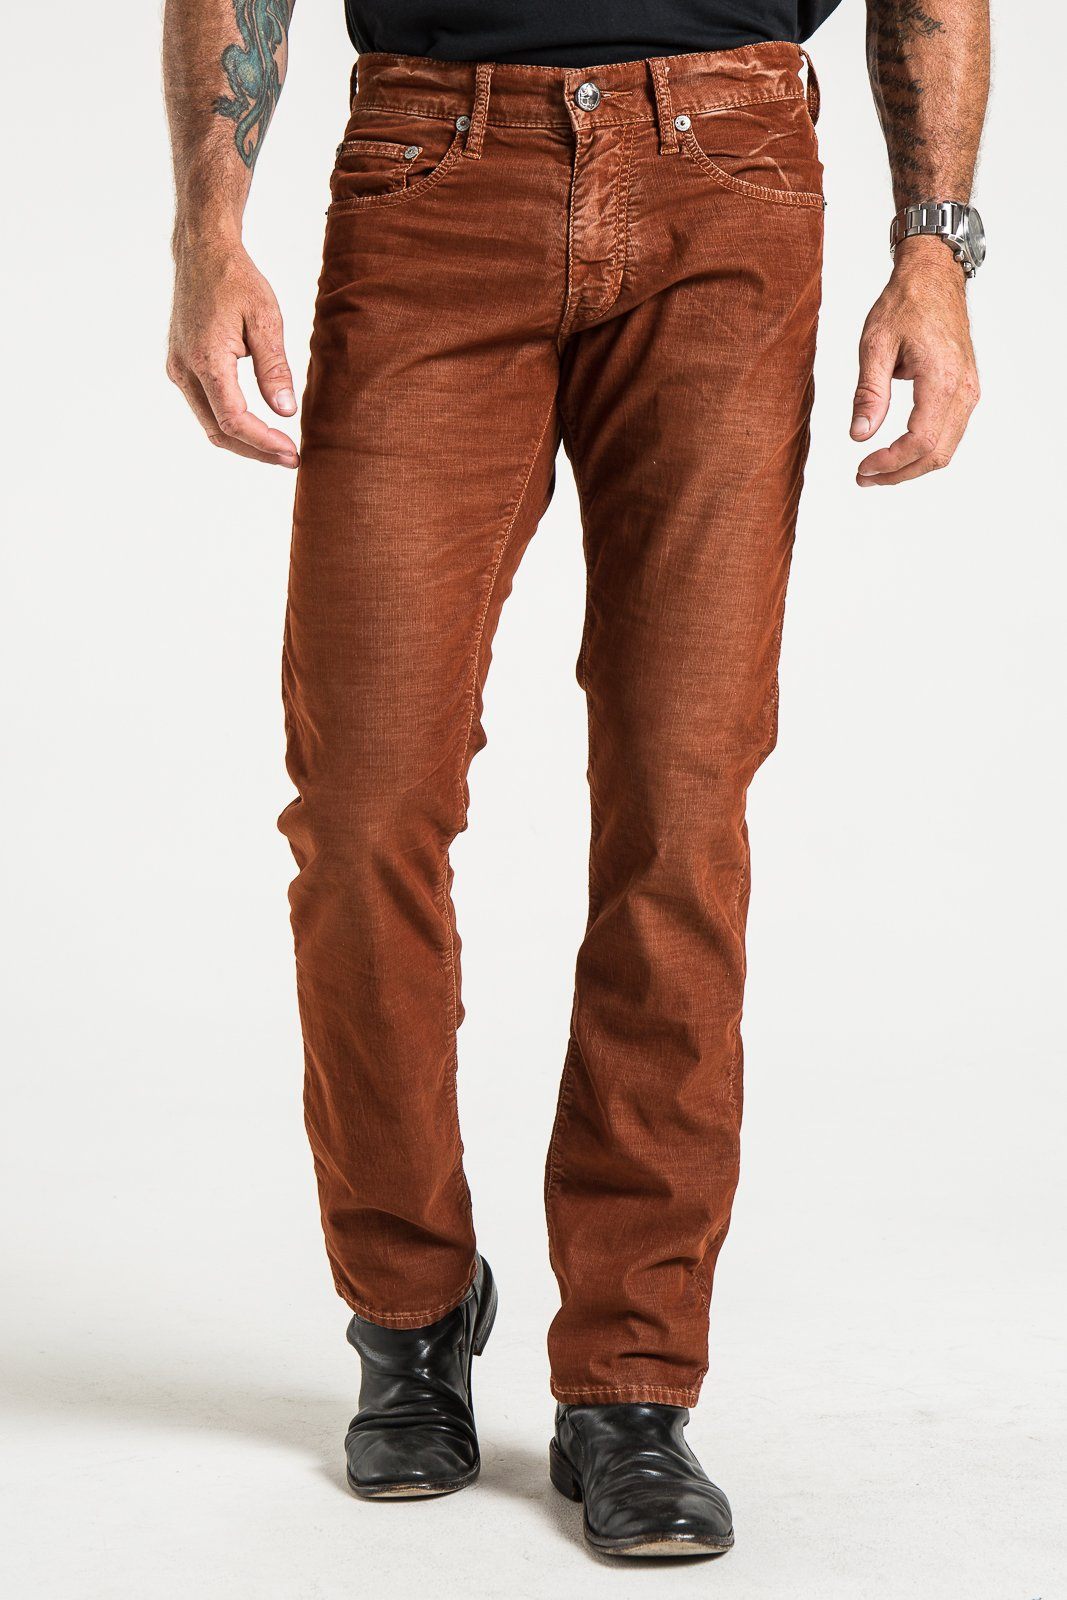 BARFLY SLIM IN RUST WASHED RUSTIC CORDUROY JEANS | STITCHS – Stitch's Jeans